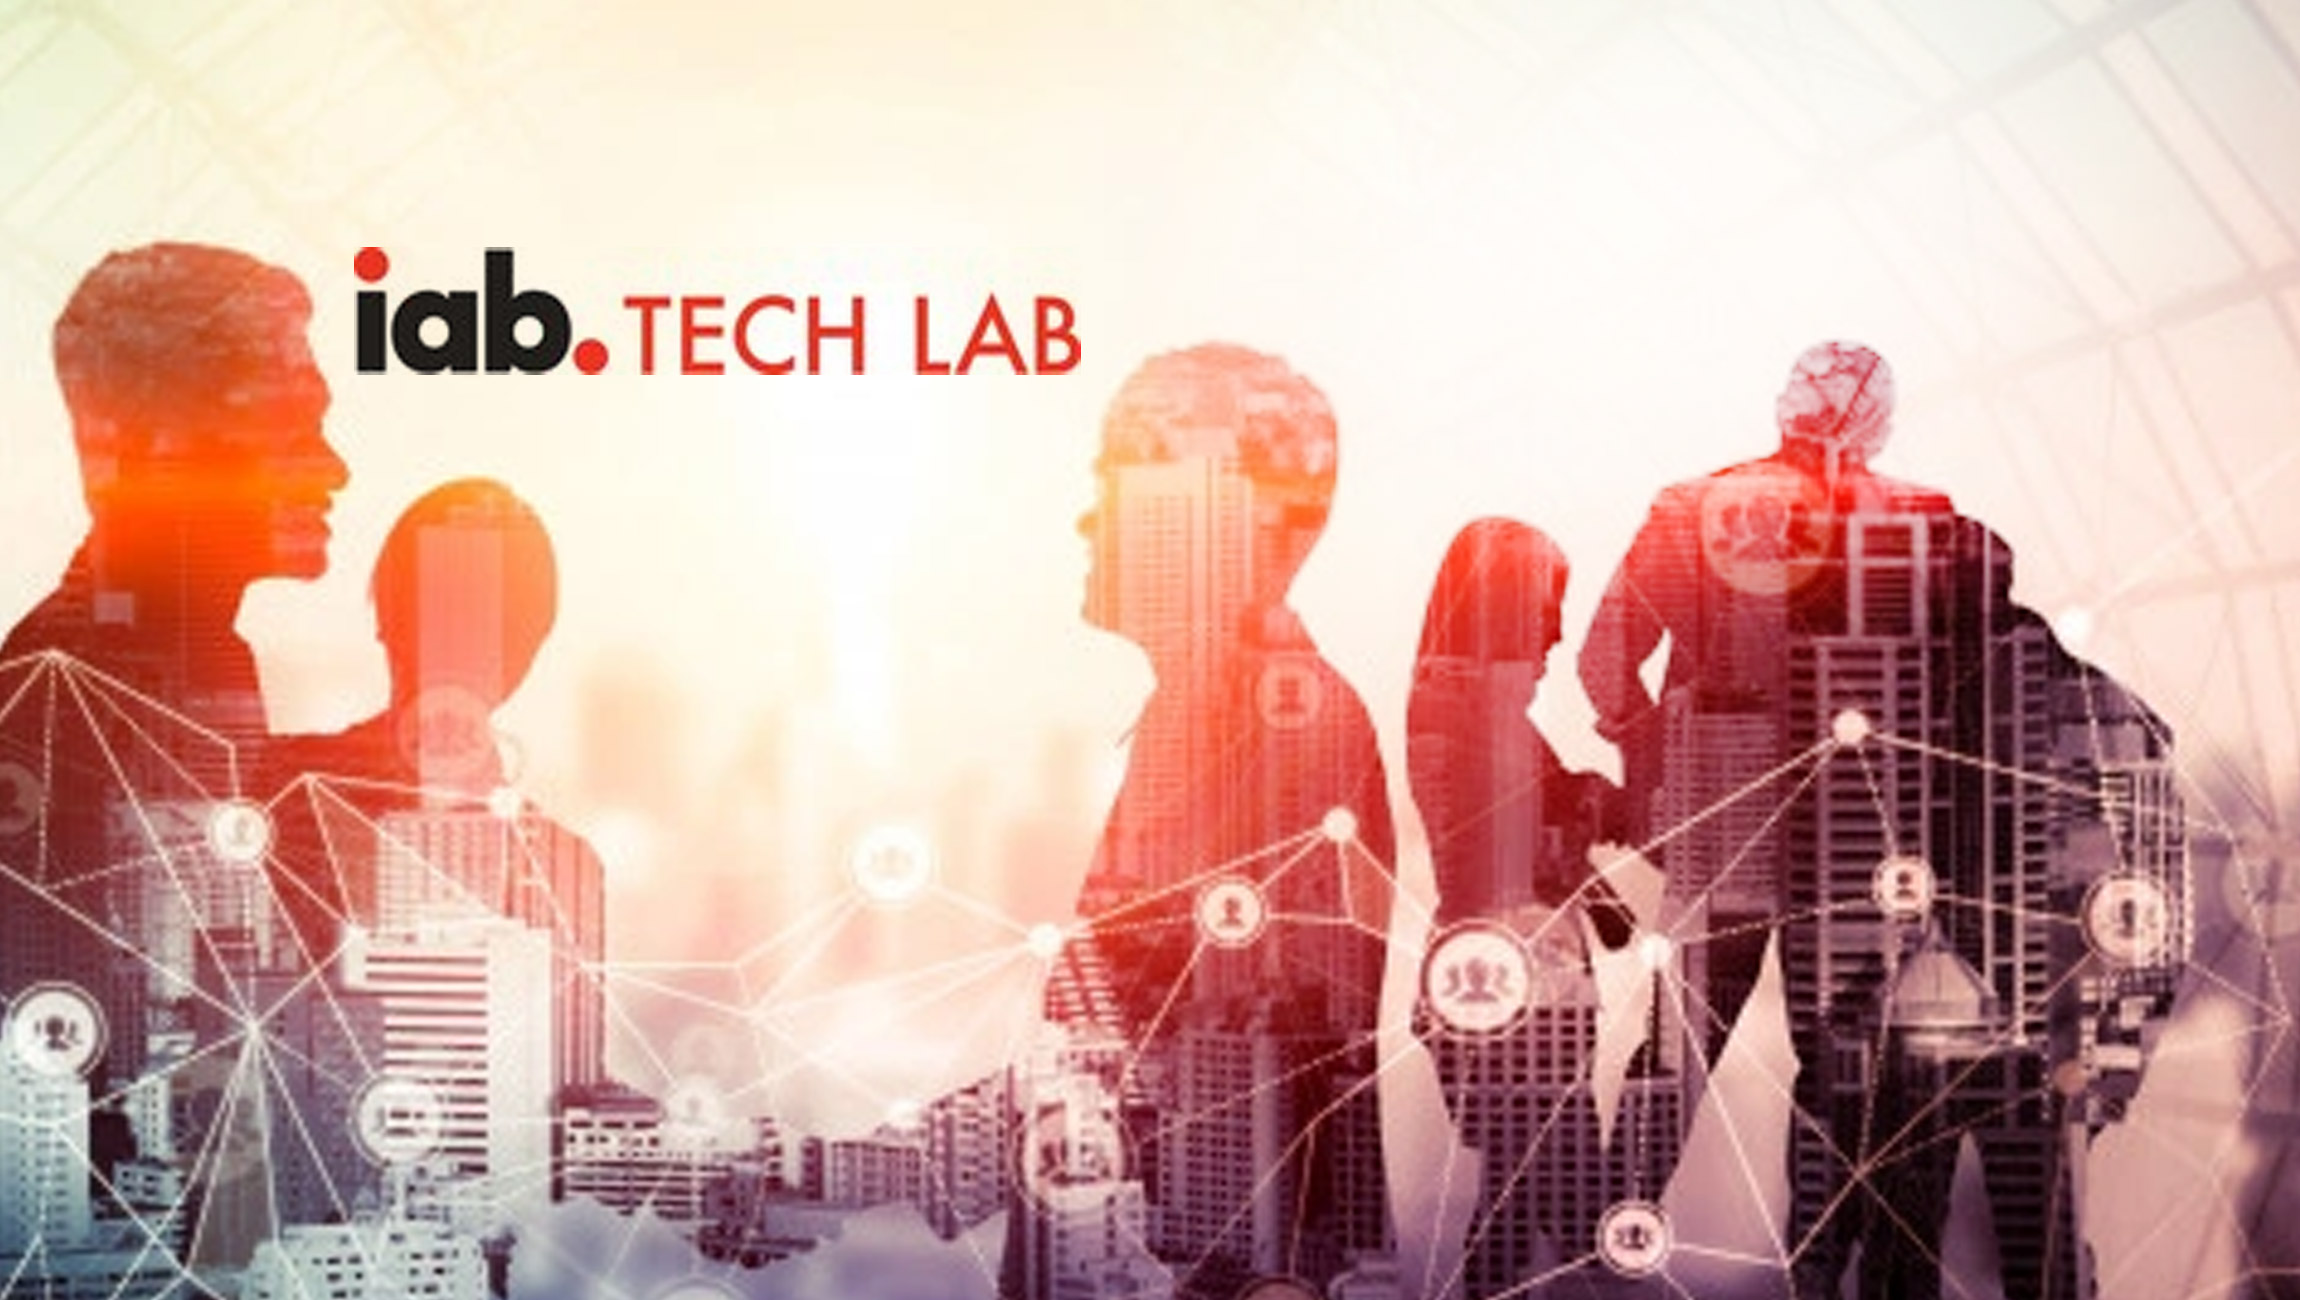 IAB-Tech-Lab-_-Neutronian-Partner-to-Accelerate-Data-Transparency-and-Quality-Standards-for-the-Digital-Supply-Chain